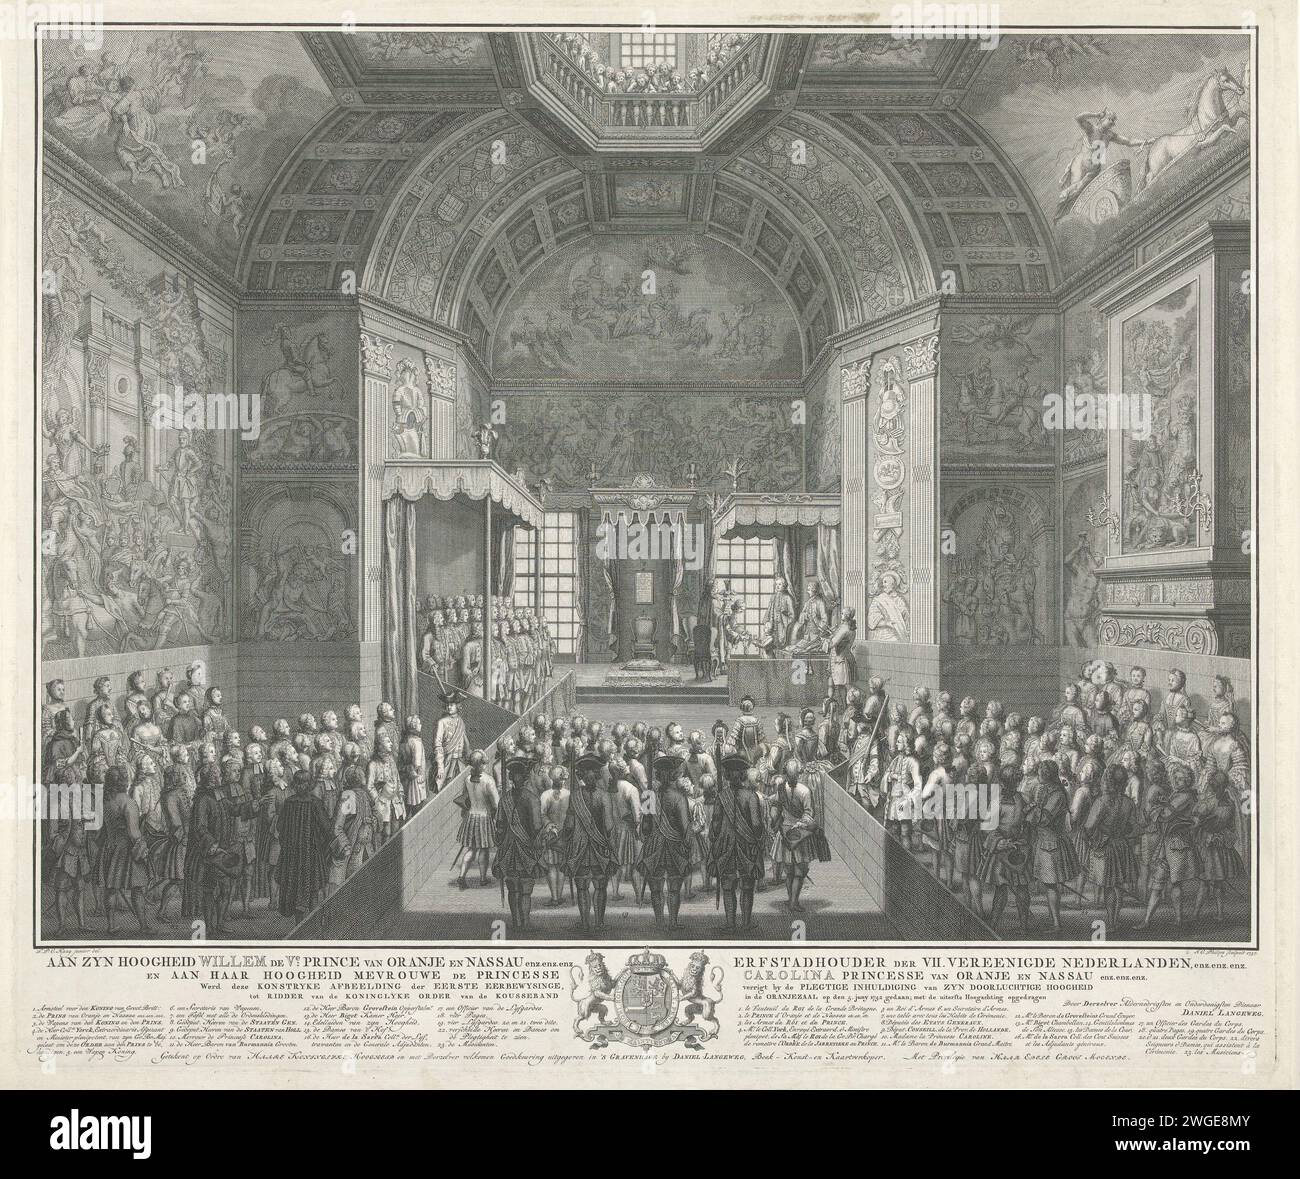 Inauguration of Prince William V as Knight in the Order of the Garter Band, 1752, 1757 print The solemn inauguration of Prince William V to Knight in the Order of the Garter Band, in the Oranjezaal in the Huis ten Bosch Palace, 5 June 1752. The prince will be handed over the order chain in front of the many attendees. In the album the caption with the legend 1-23 in Dutch and French and the prince's weapon. print maker: Northern Netherlandspublisher: The Hague paper etching / engraving knighting ceremonies Palace Huis ten Bosch Stock Photo